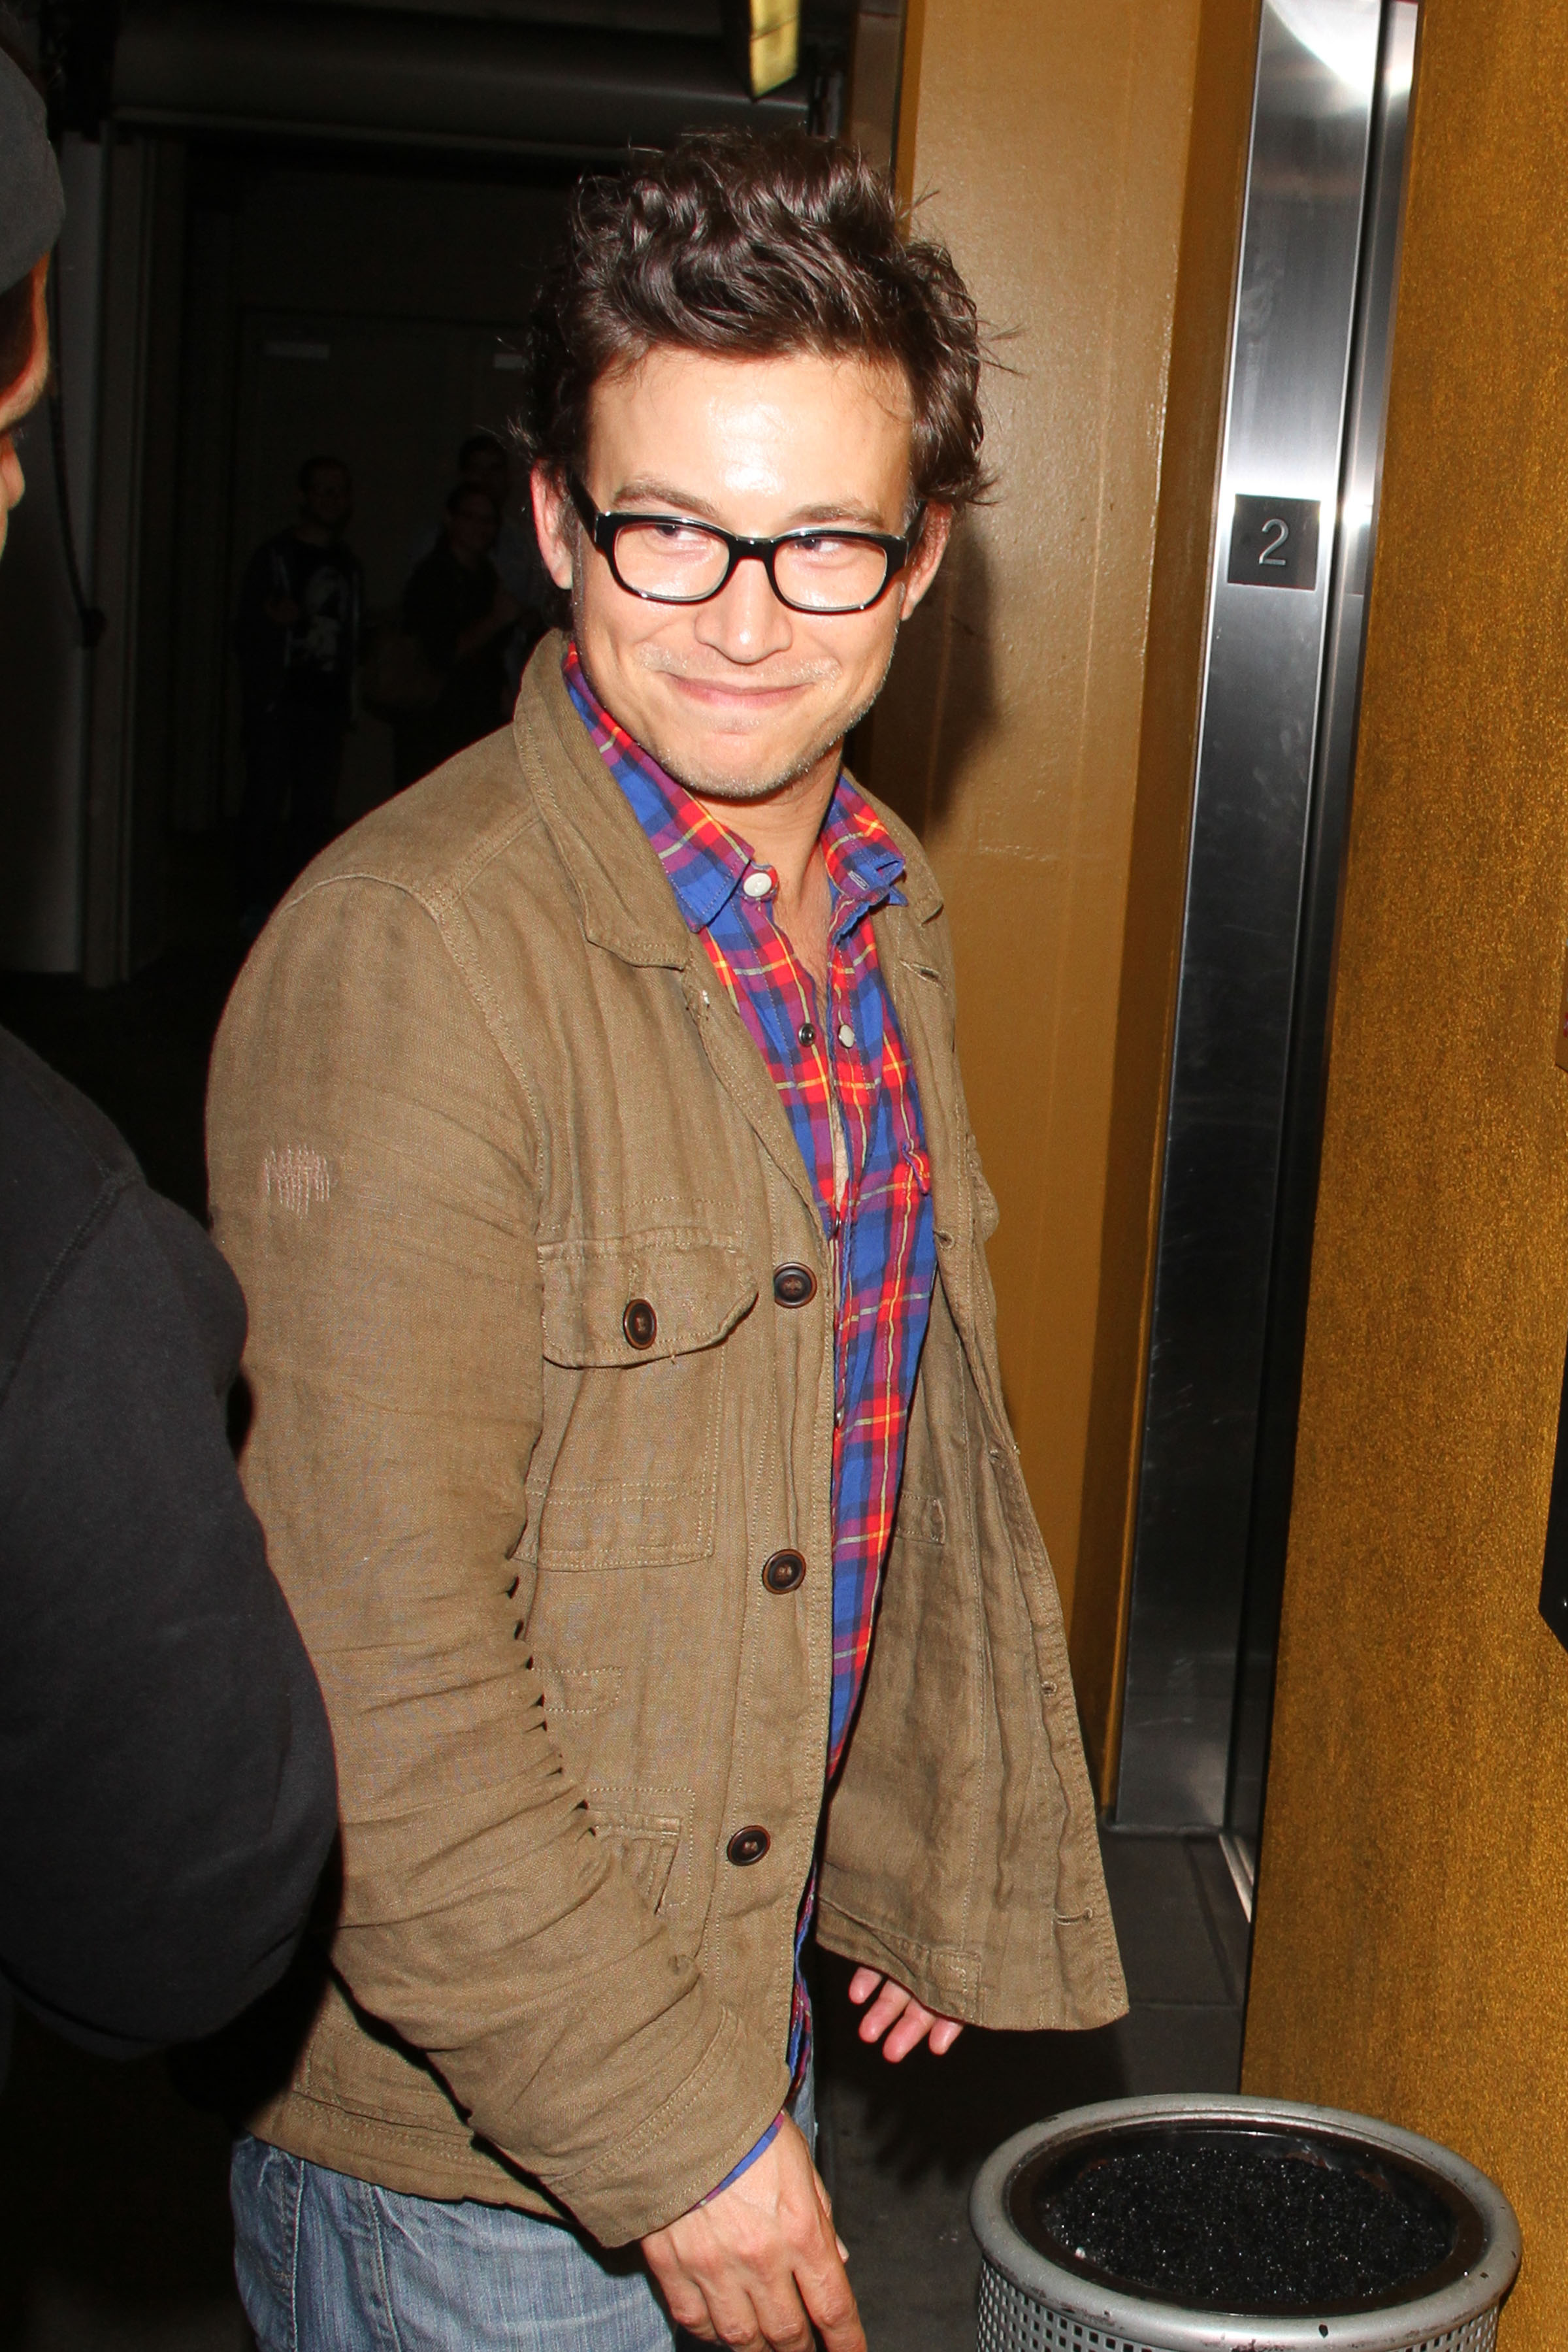 Actor Jonathan Taylor Thomas as seen on August 14, 2013, in Los Angeles, California. | Source: Getty Images